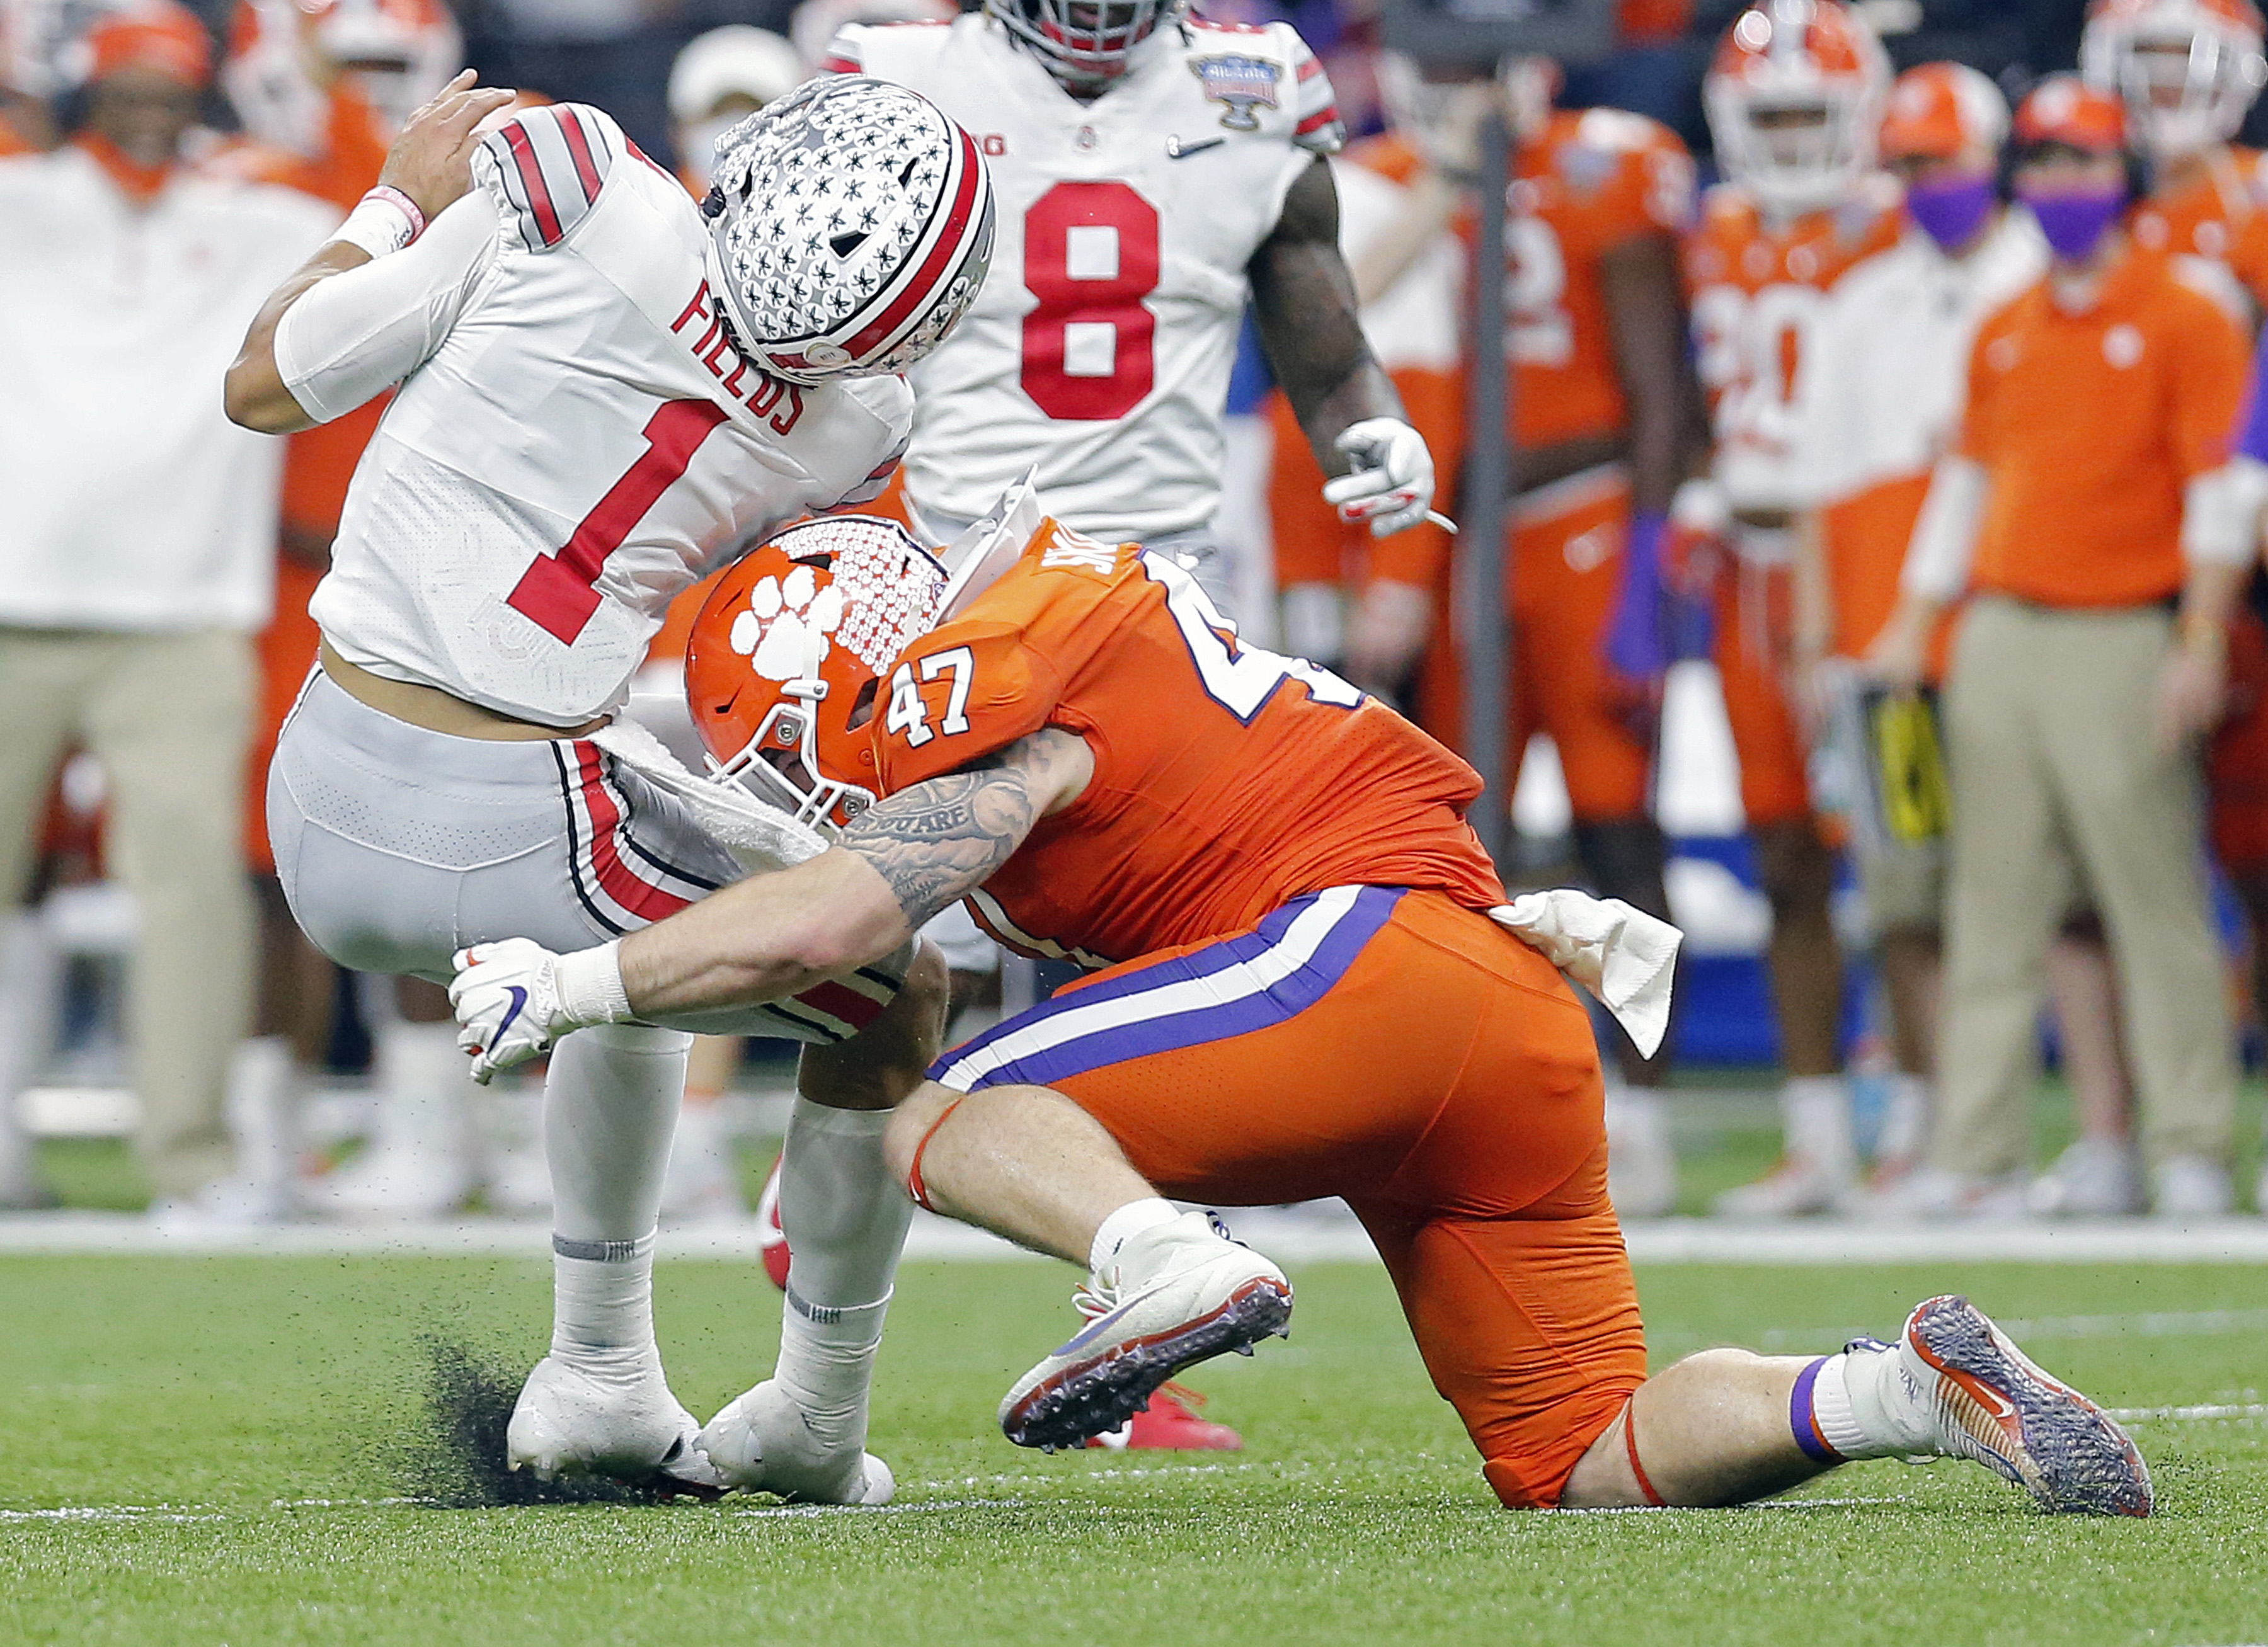 Ohio State Buckeyes quarterback Justin Fields (1) gets hit by Clemson Tigers linebacker James Skalski (47) in the second quarter during the College Football Playoff semifinal at the Allstate Sugar Bowl in the Mercedes-Benz Superdome in New Orleans on Friday, Jan. 1, 2021. Skalski was called for targeting on the play and kicked out of the game.